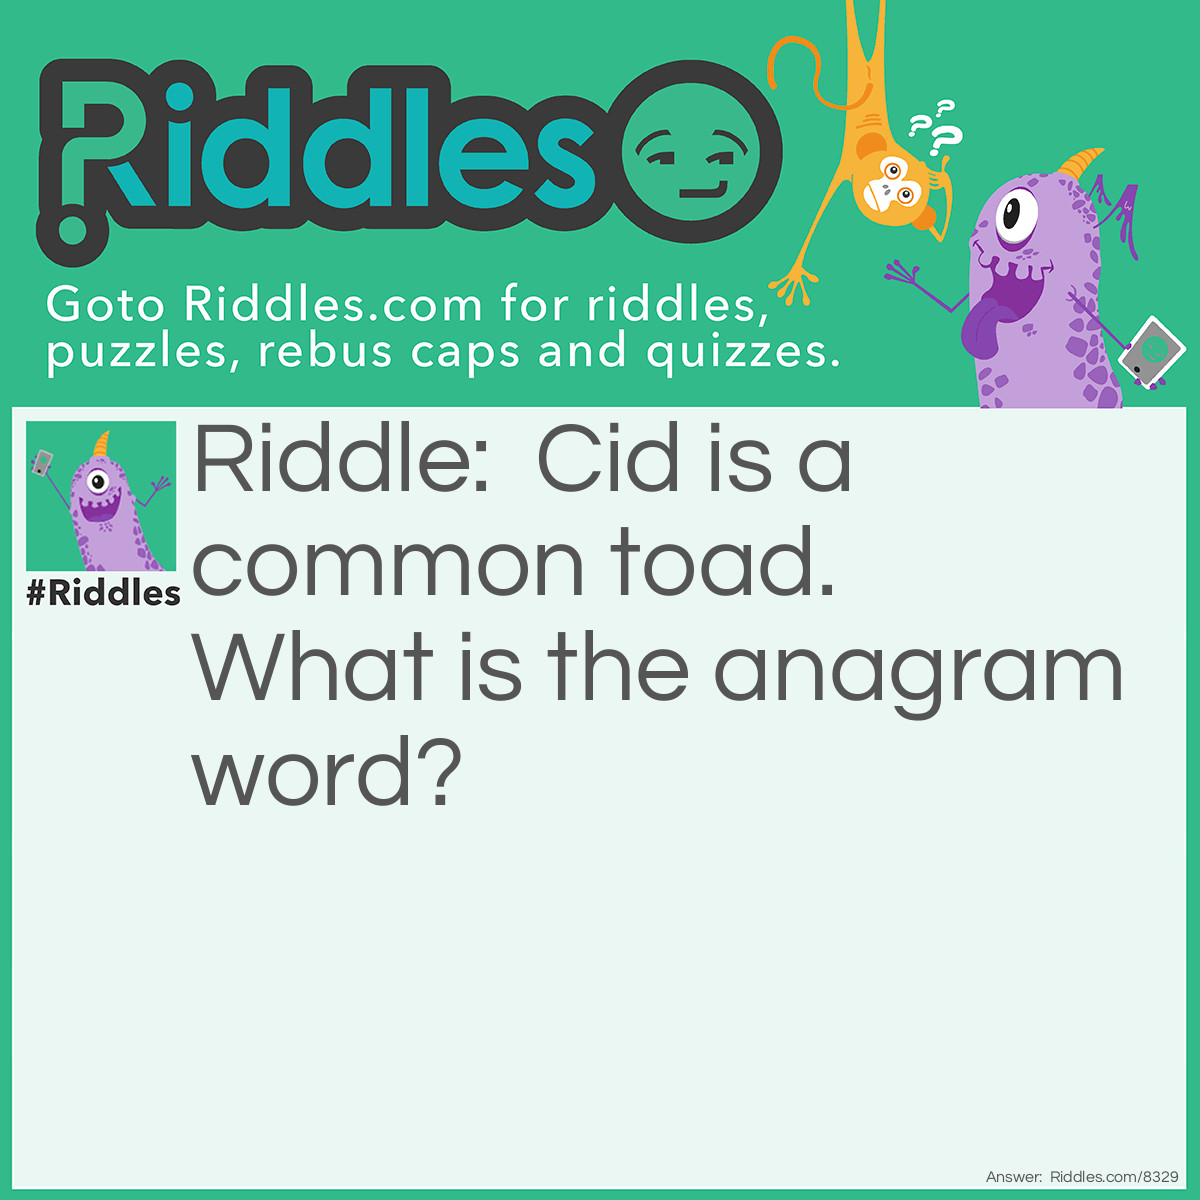 Riddle: Cid is a common toad.  What is the anagram word? Answer: Disaccommodation.